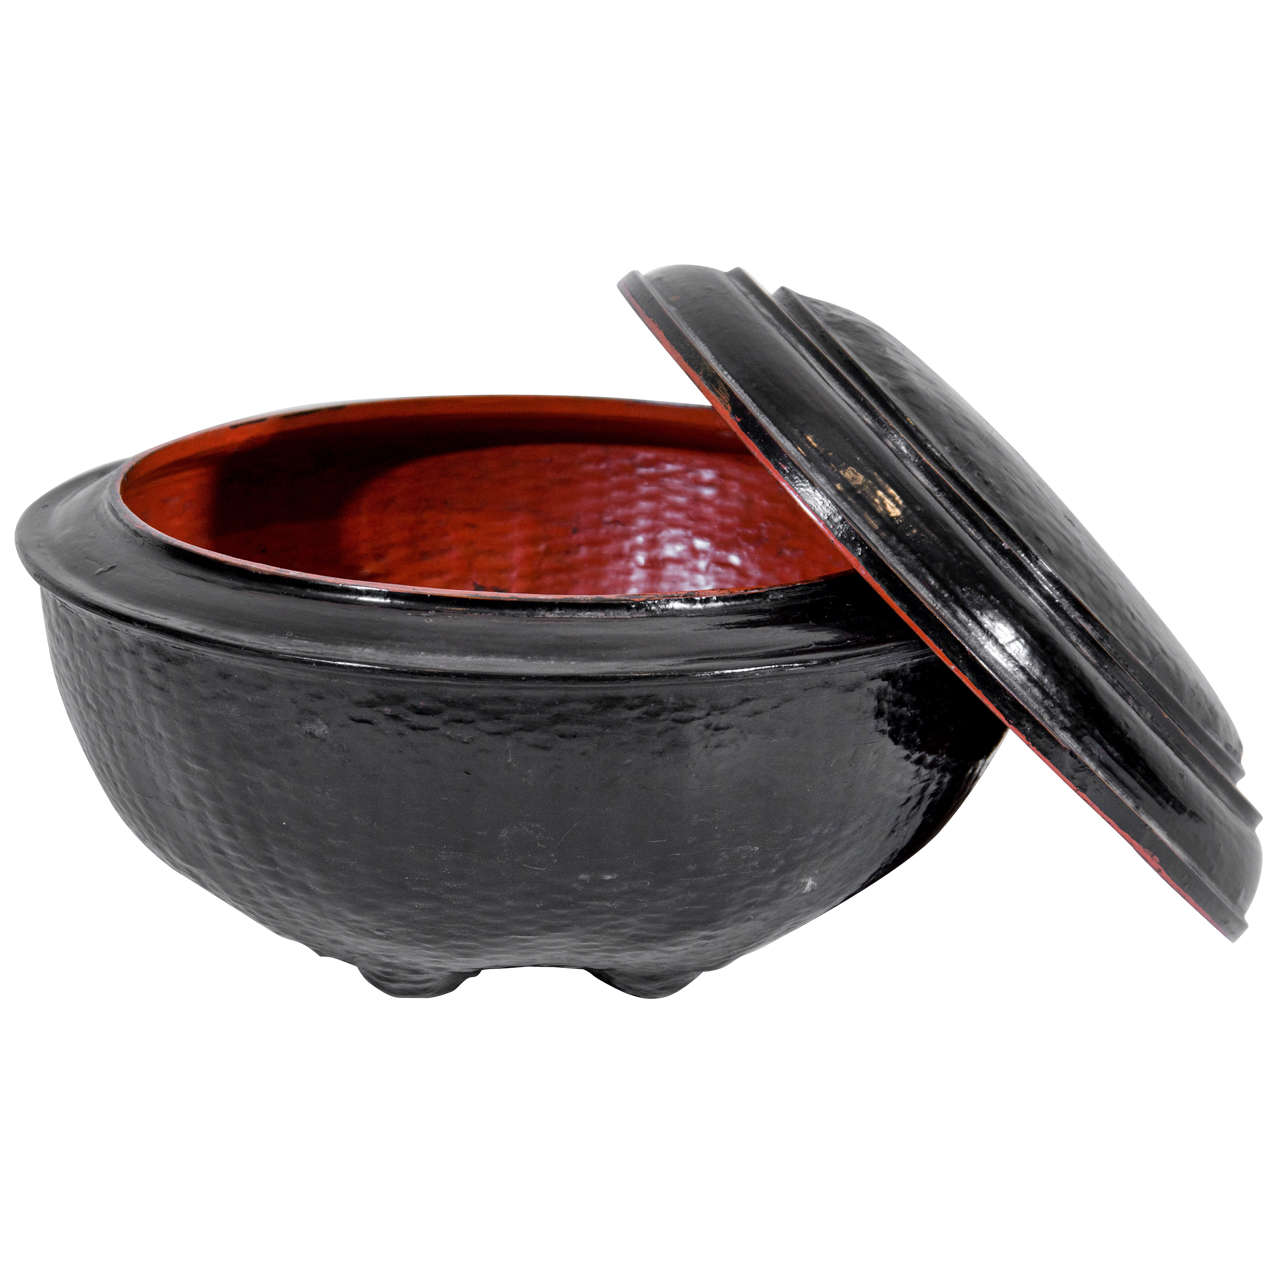 Lacquer Ceremonial Monastery Food Bowl